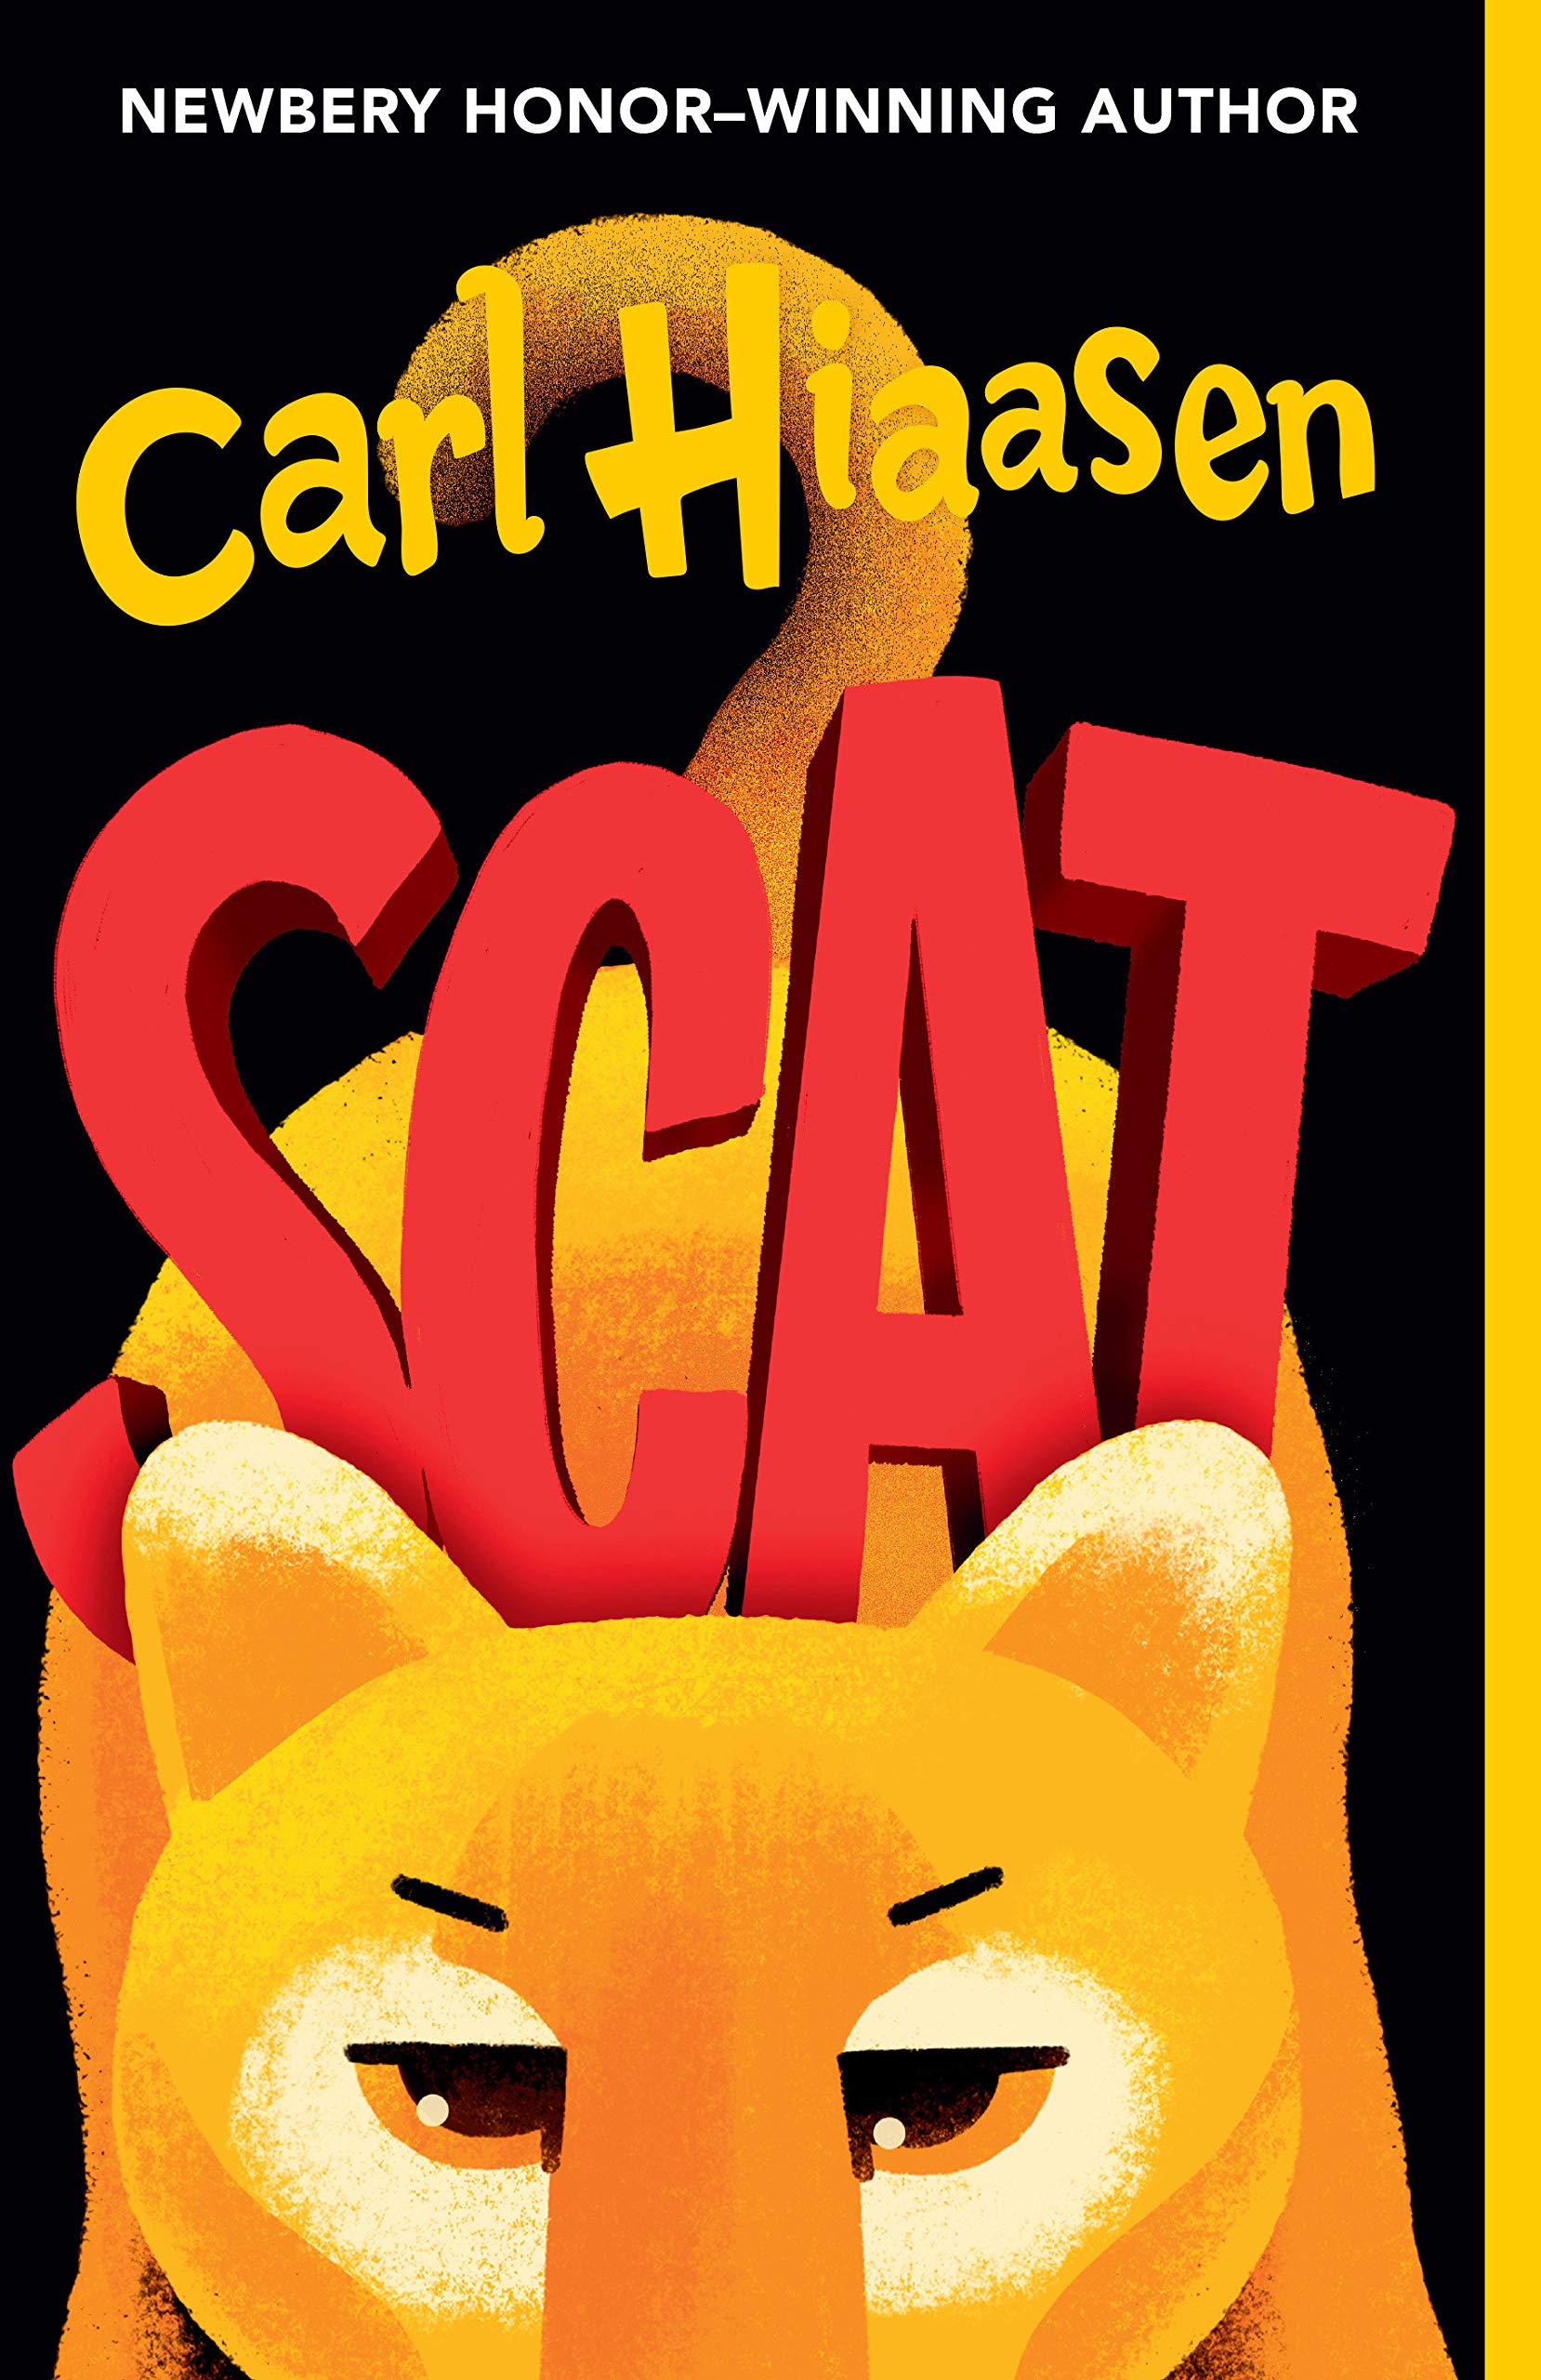 Cover of the book Scat. Features the title in red lettering on the top of a orange-colored illustration of a panther.